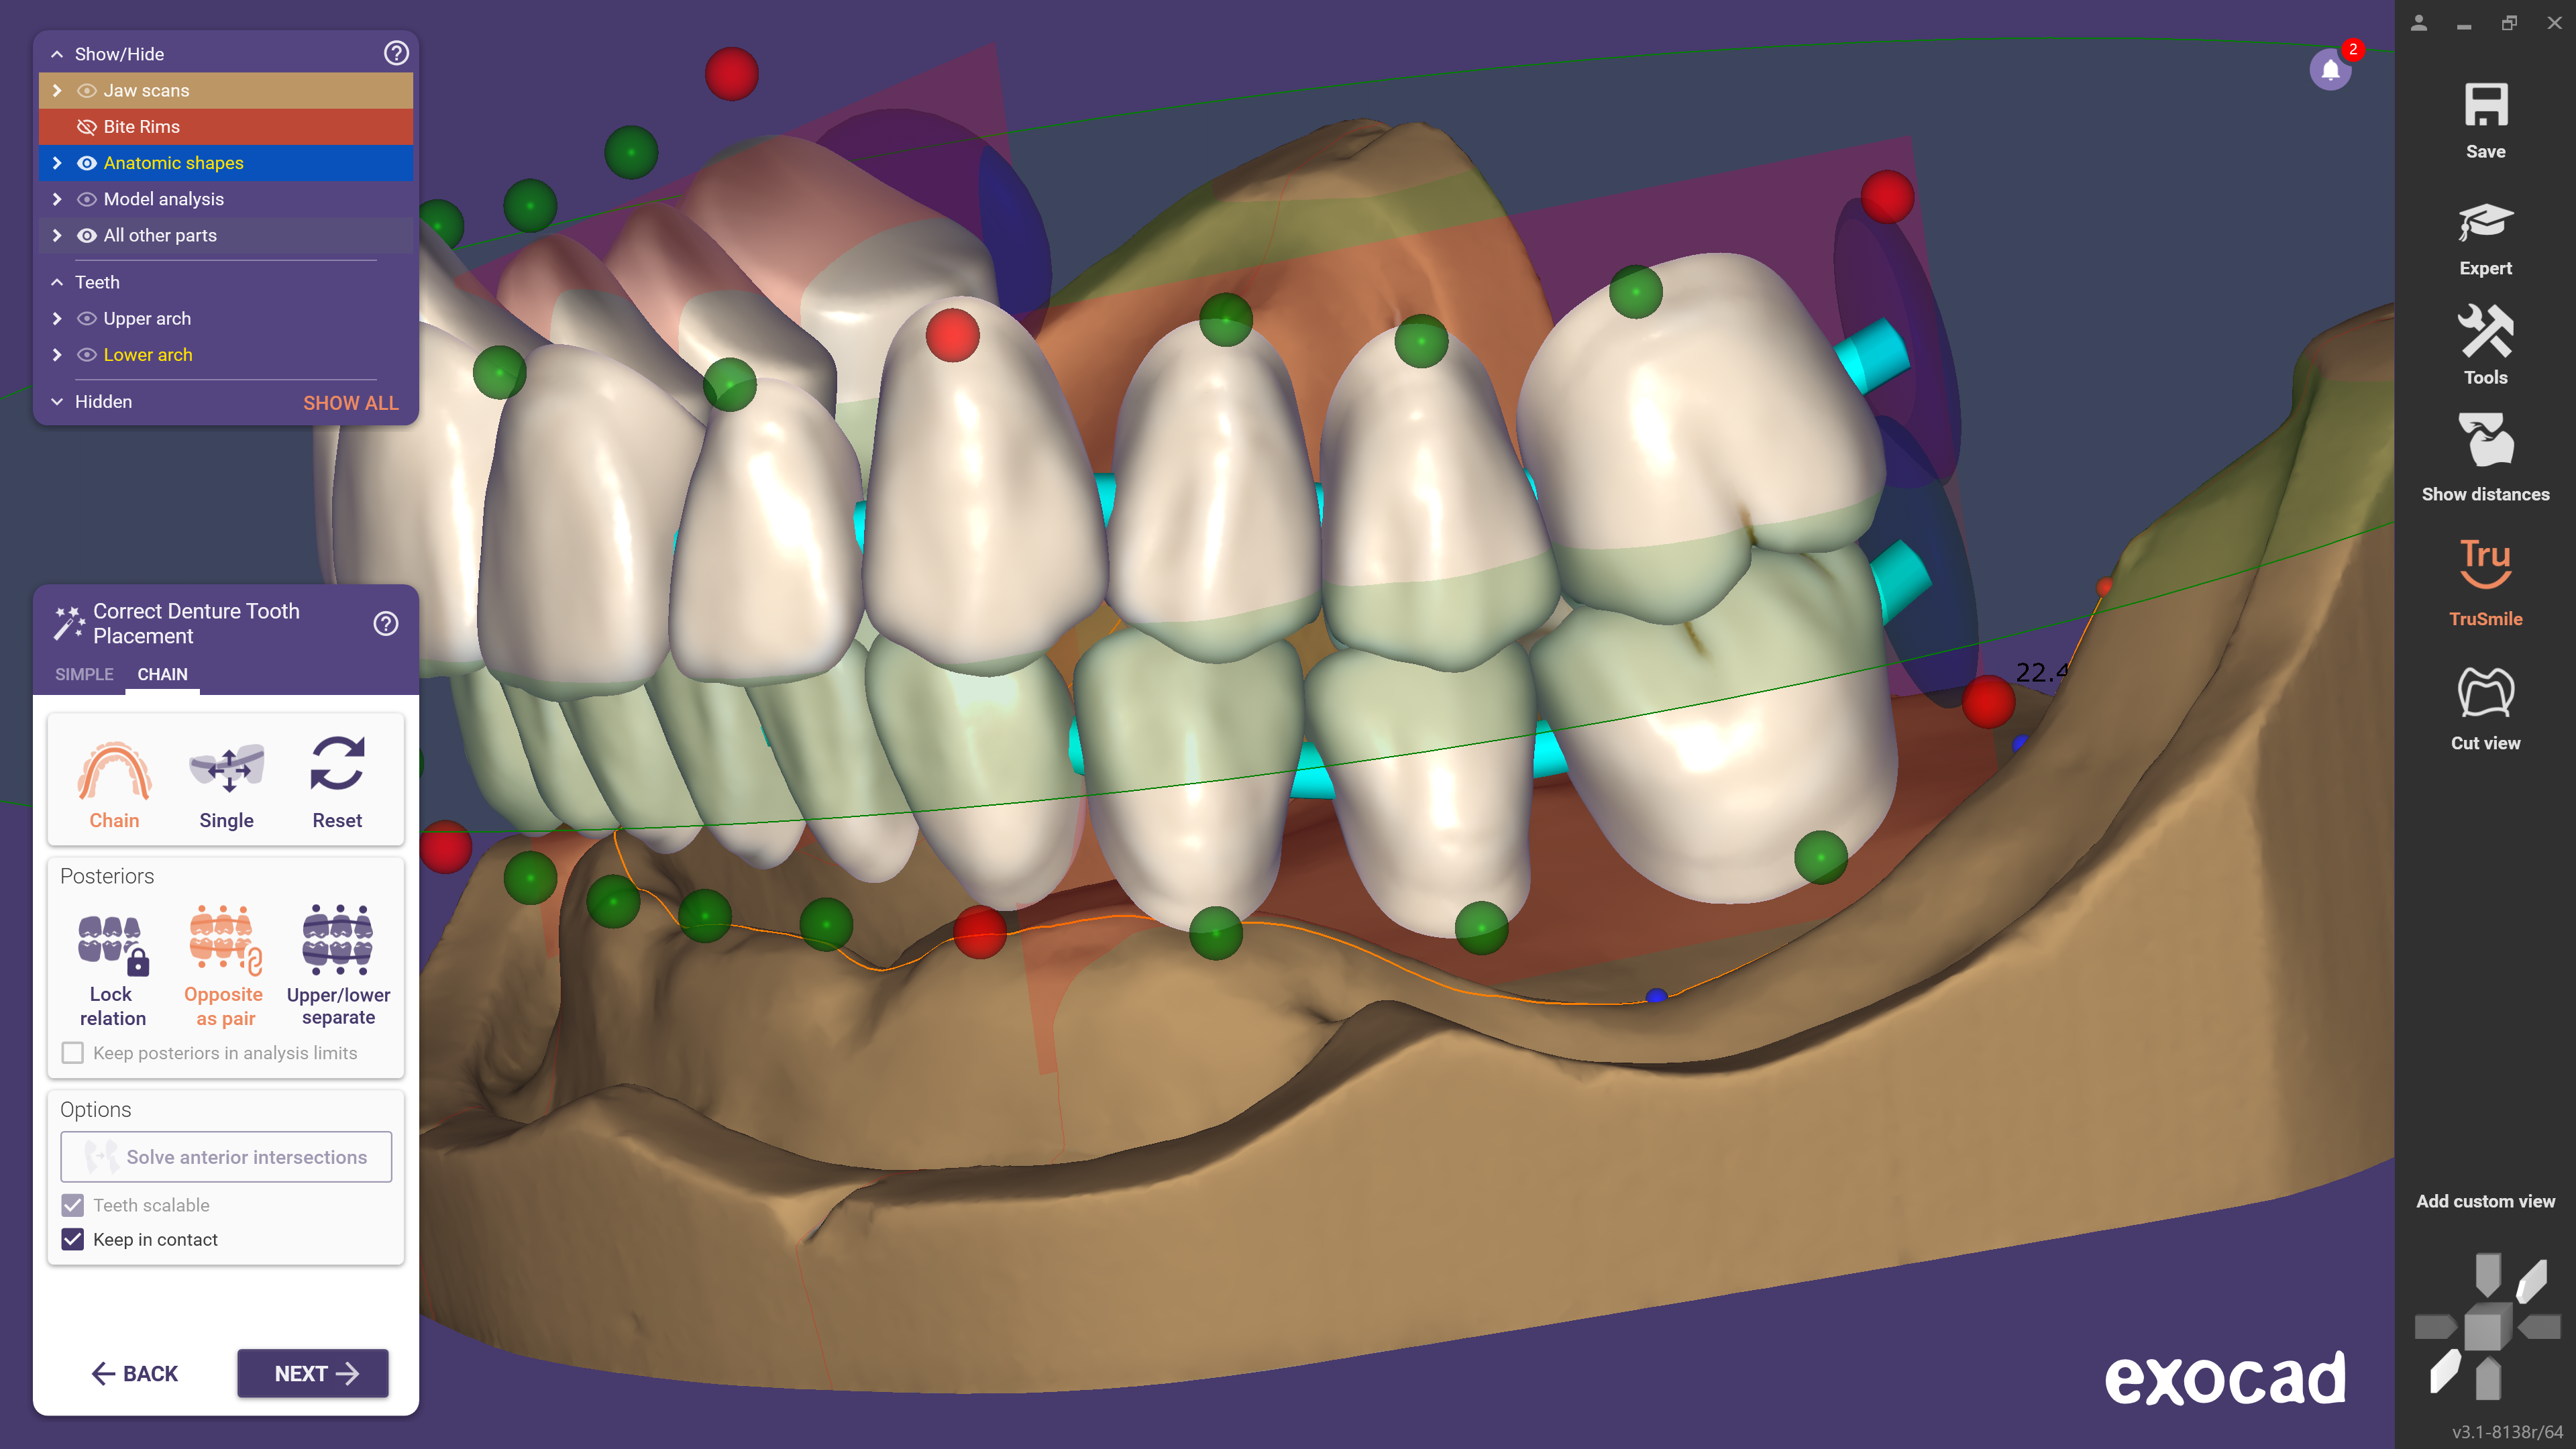 Posterior teeth can now also be individually adjusted in the set-up of full dentures. (Image: exocad)